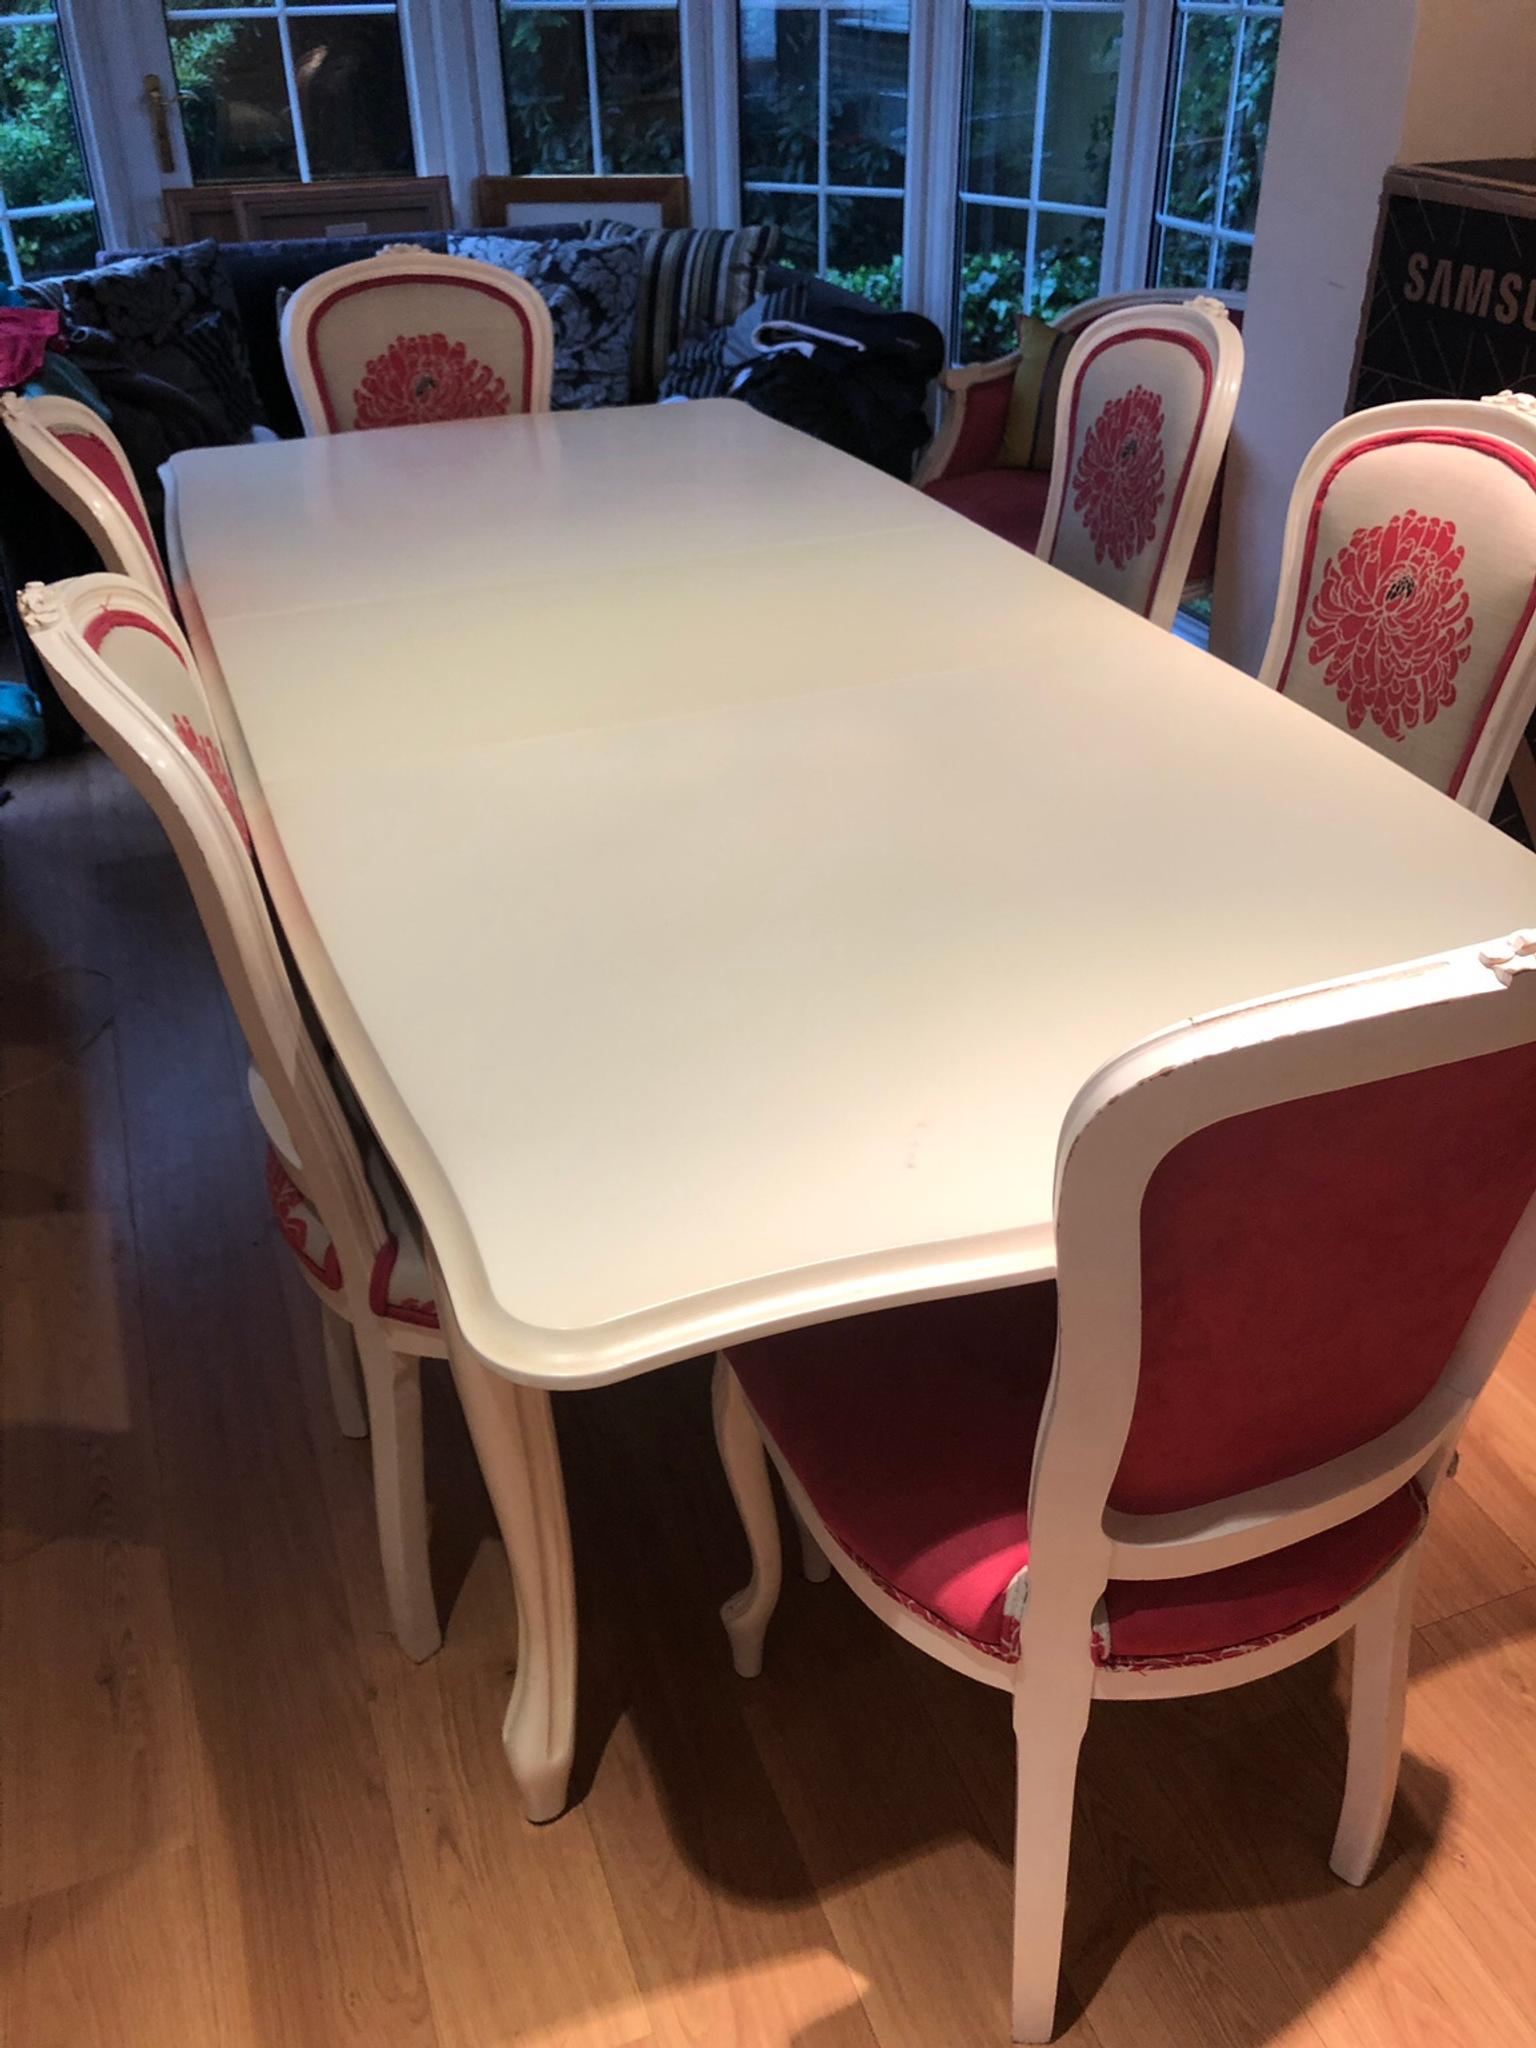 Laura Ashley Provencal Dining Room Table Set In Brentwood For 150 00 For Sale Shpock